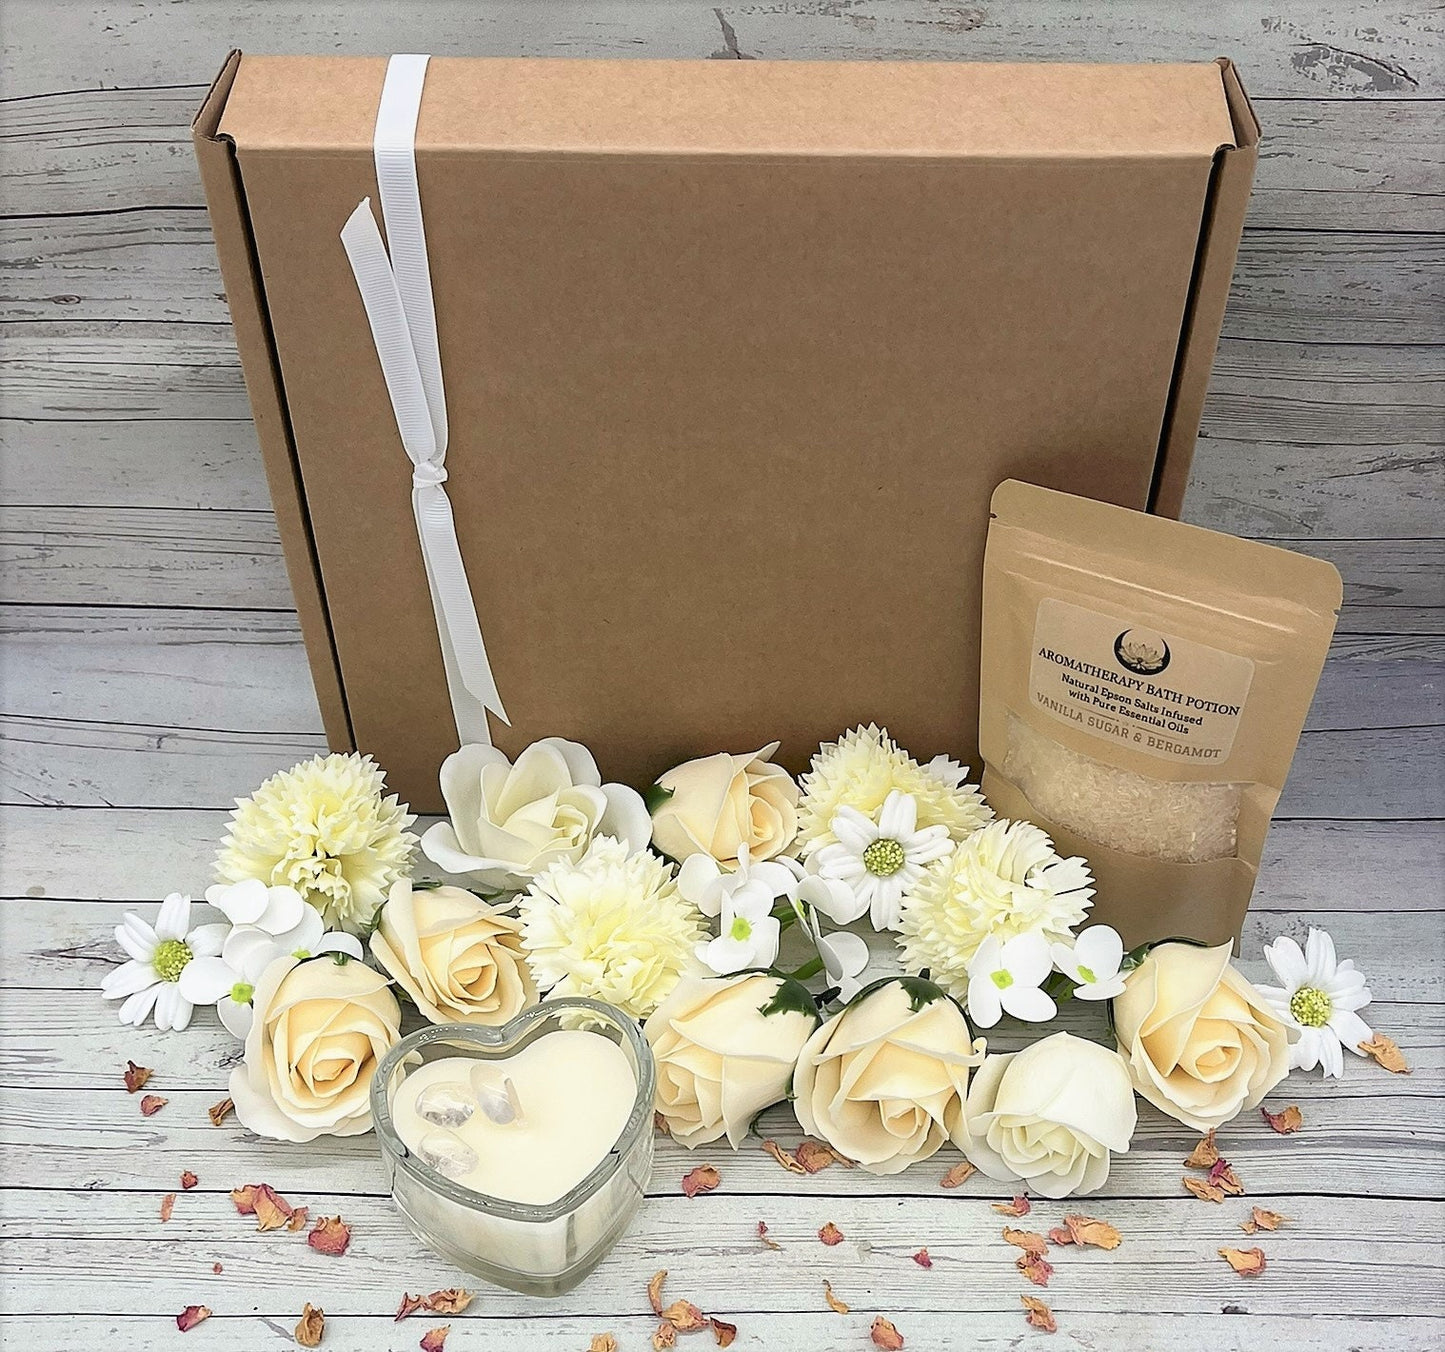 THE BLOOMING CREAM Luxury Spa Gift Box, Quartz Vanilla Candle, Aromatherapy Bath Salts, Soap Flowers, Bathe in Beauty, Relaxation, Languish.